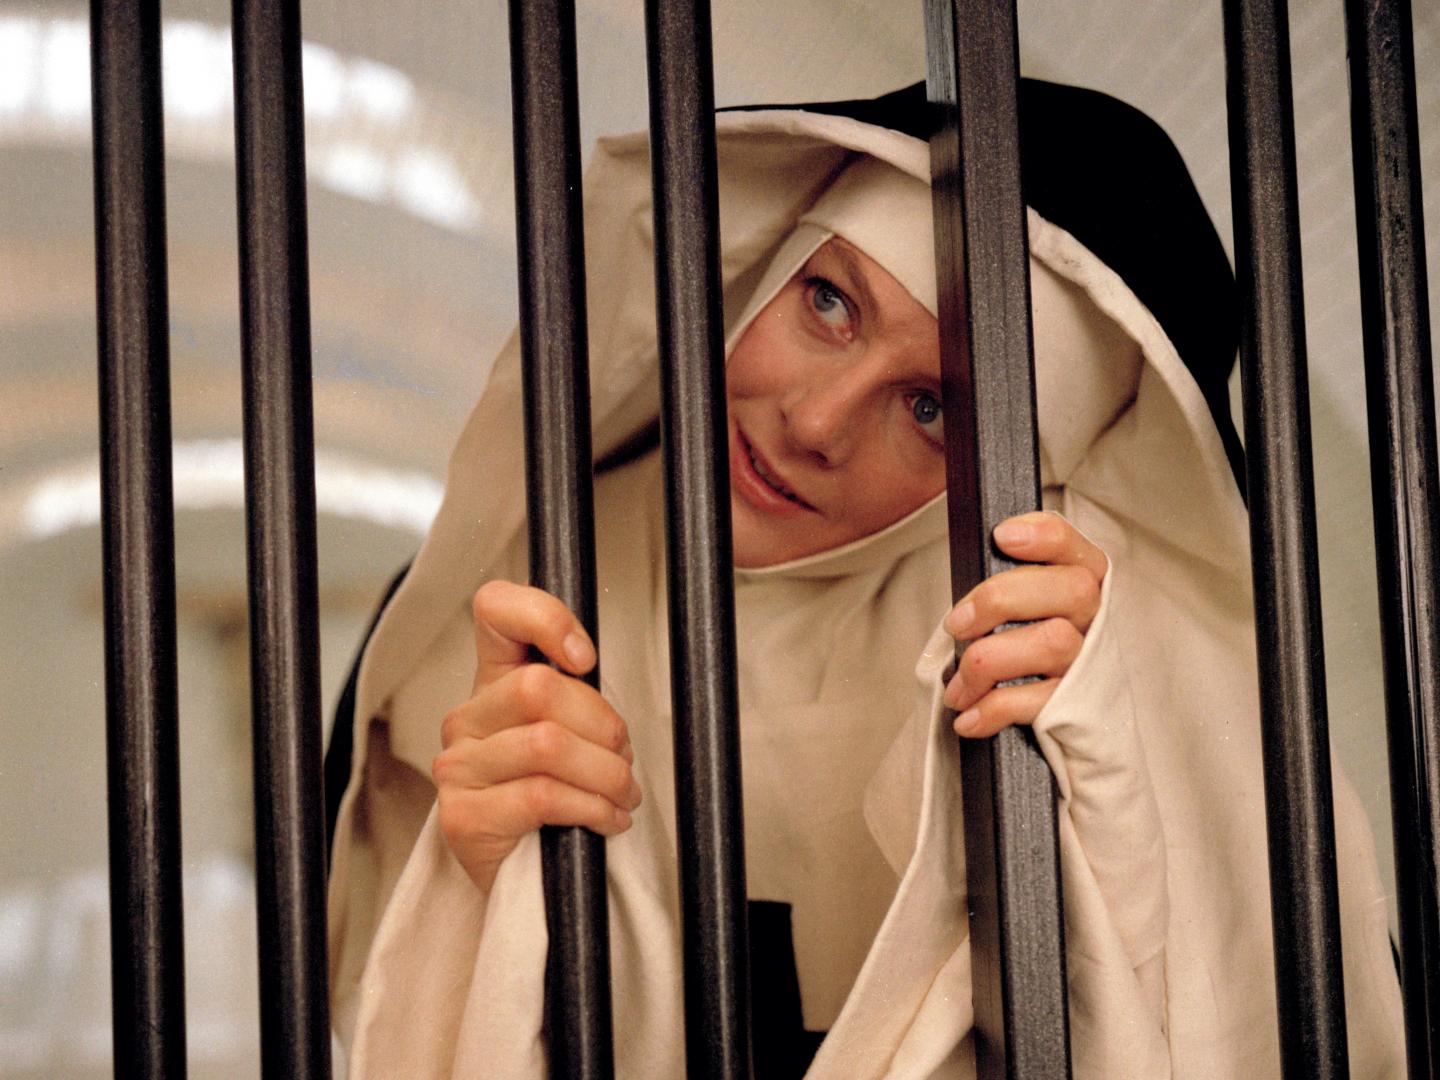 Still from the 1971 film The Devils depicting actor Vanessa Redgrave in a nun's habit looking out from behind bars.